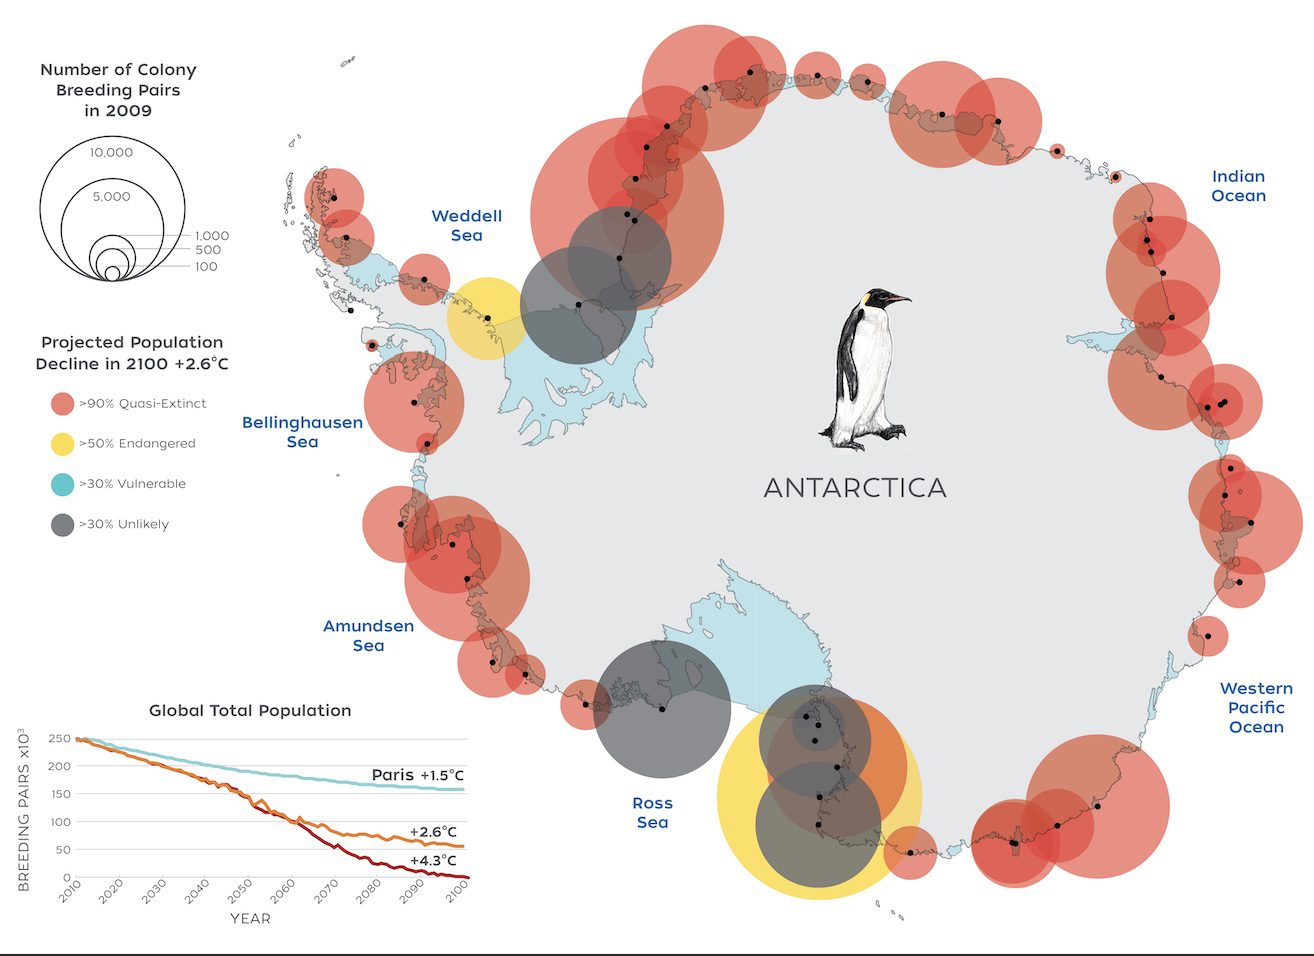 Impact of climate change on emperor penguin global population and local colonies. Total number of breeding pairs of emperor penguins from 2009 to 2100 projected for various climate scenarios (panel). Conservation status of emperor penguin colonies by 2080 for the 2.6°C Scenario (map) based on the local projected population decline at the colony. (Natalie Renier ©Woods Hole Oceanographic Institution, Jenouvrier et al. 2021)
